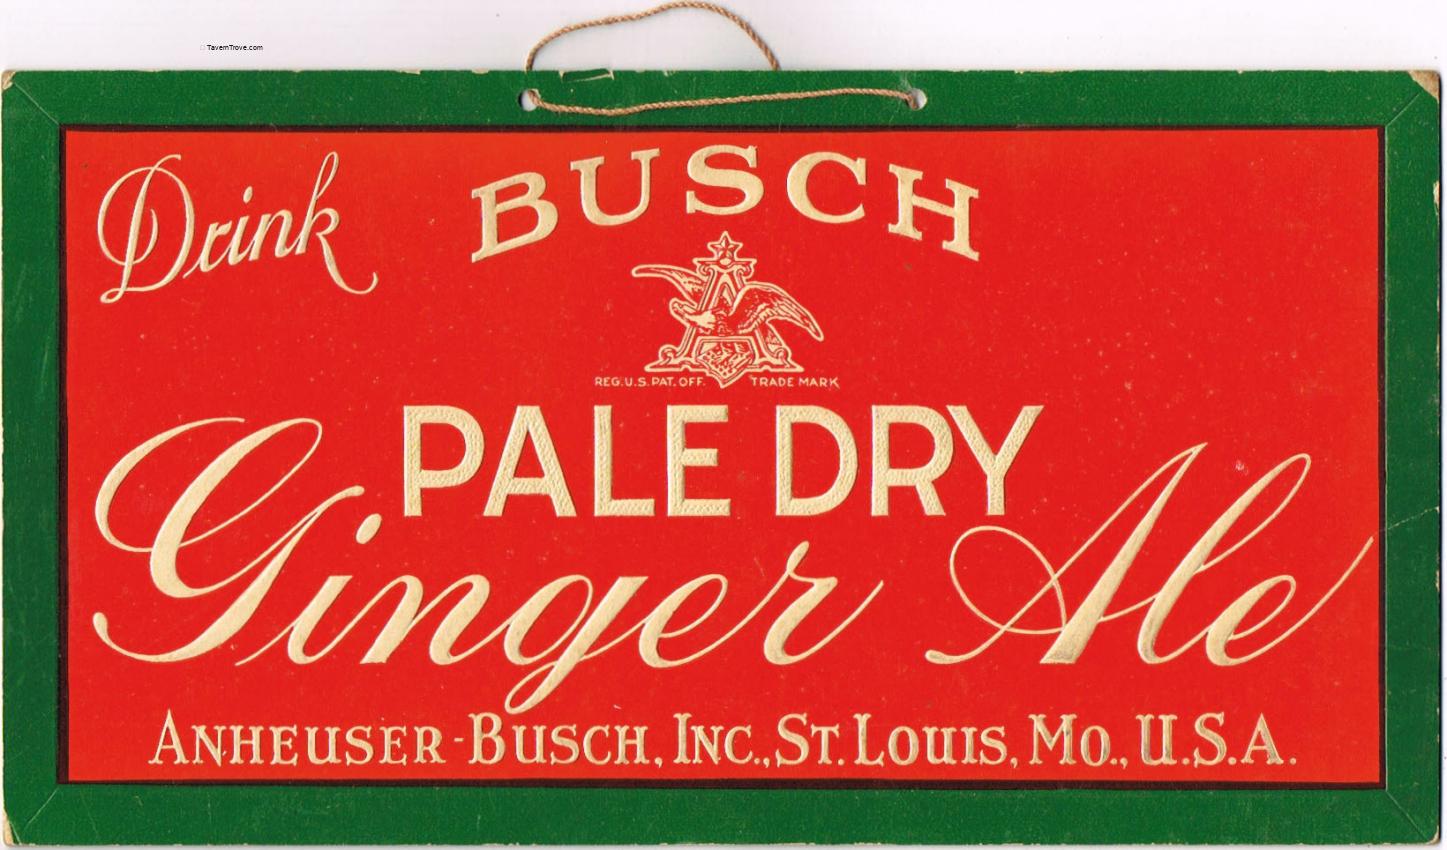 Busch Pale Dry Ginger Ale